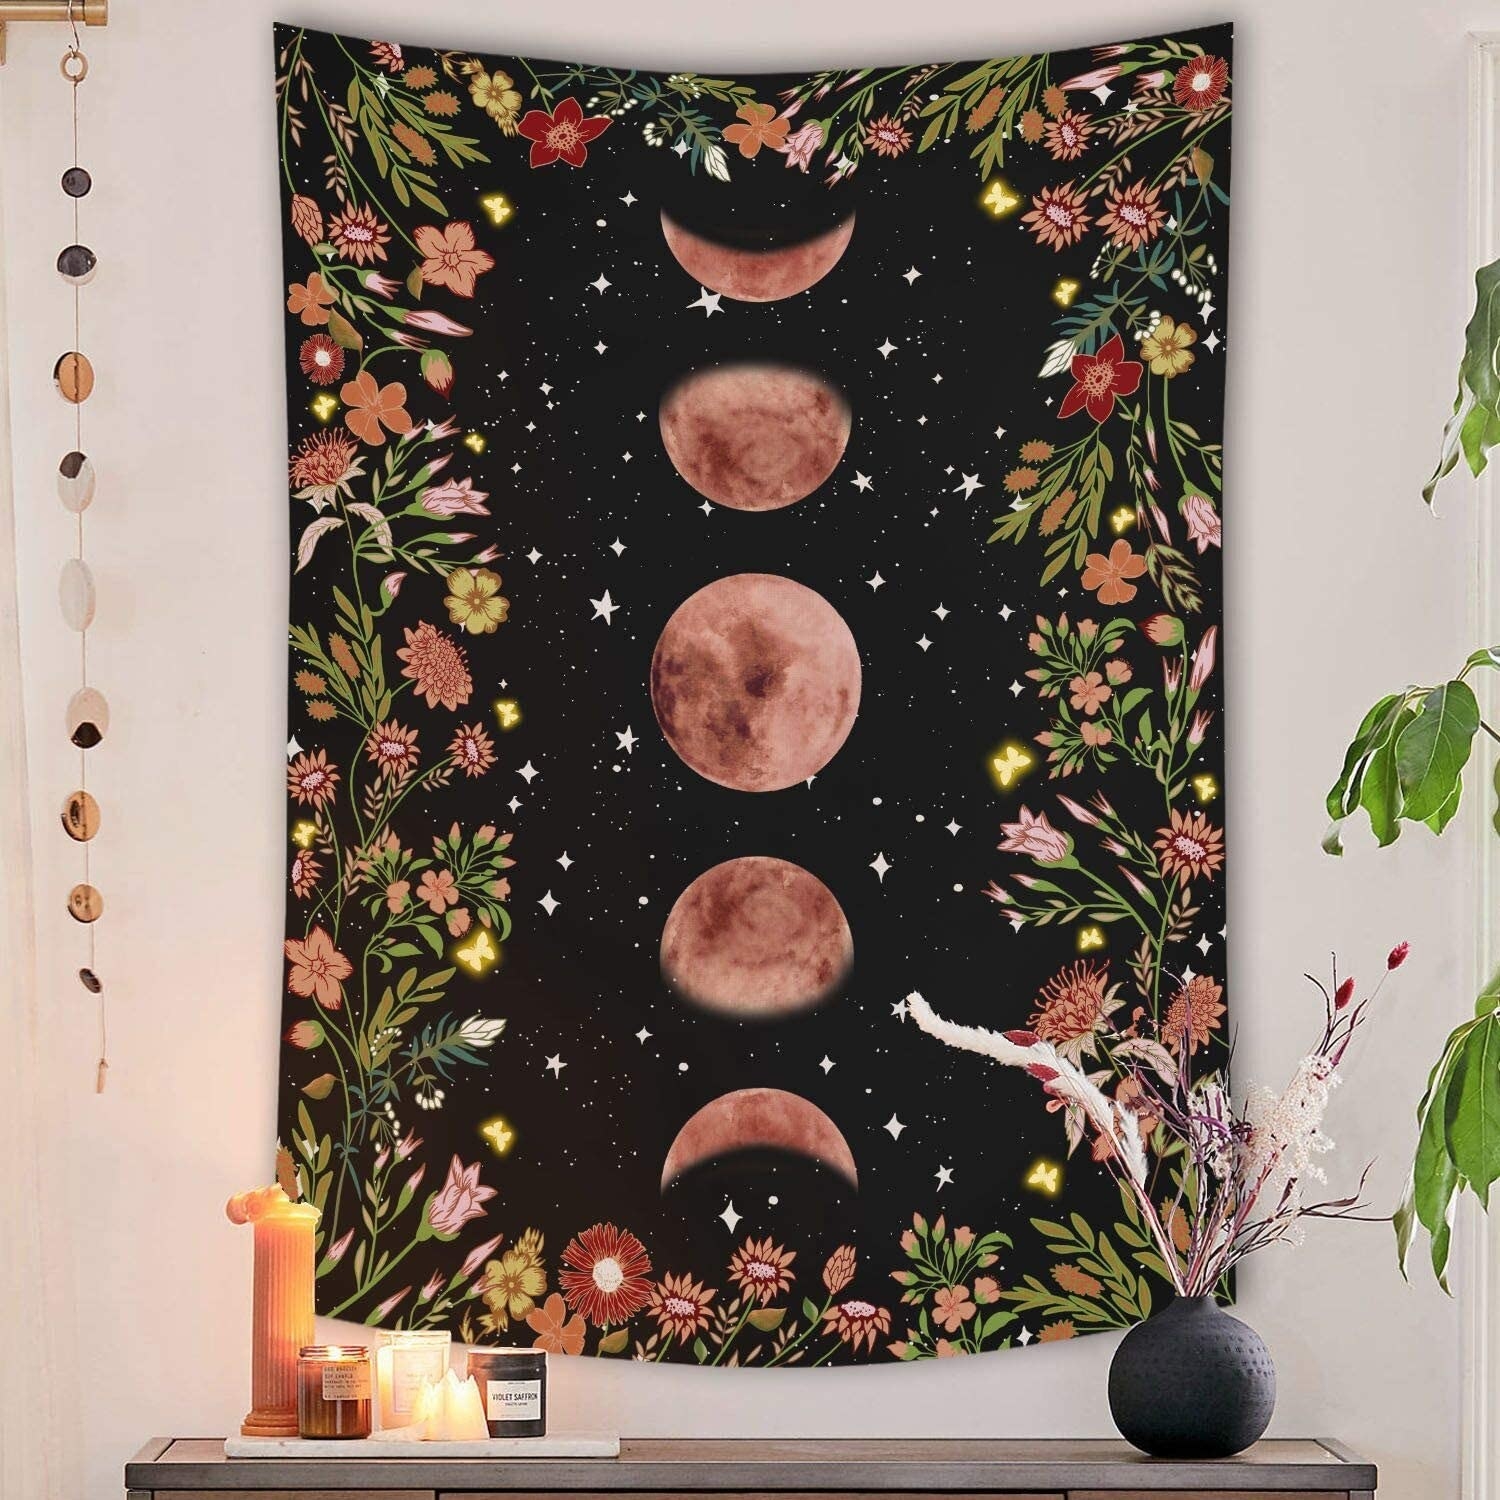 vertical tapestry hung on a wall with a black background, moon phases and stars, and flowers for a border